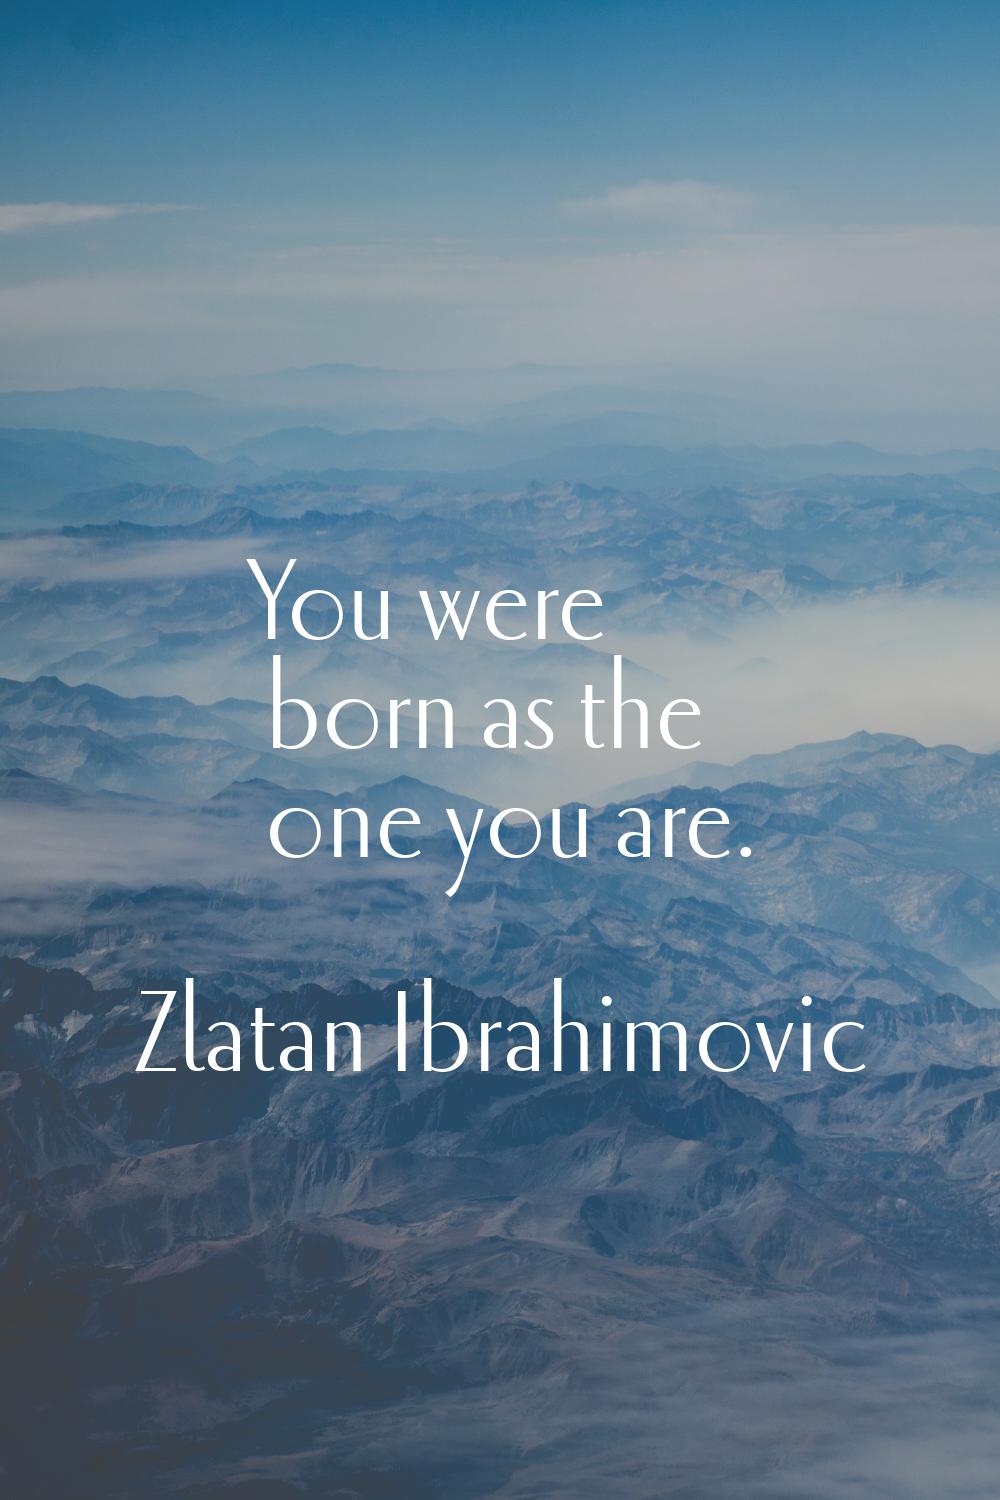 You were born as the one you are.